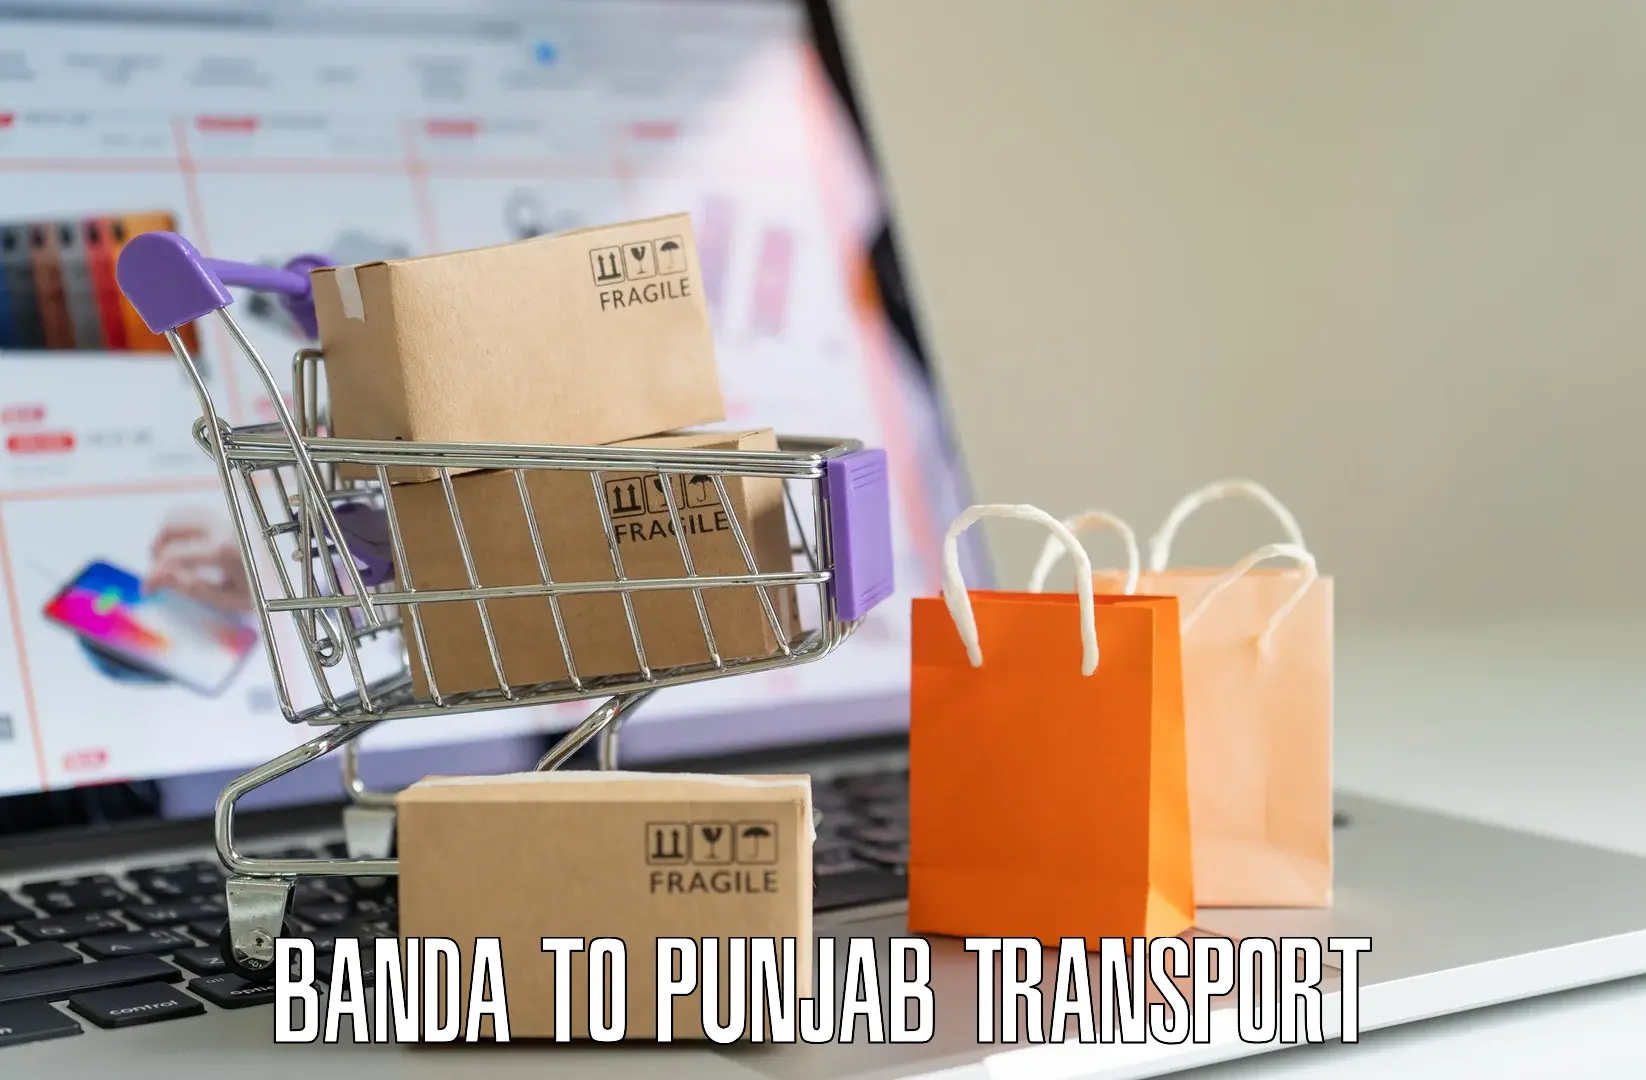 Container transportation services Banda to Punjab